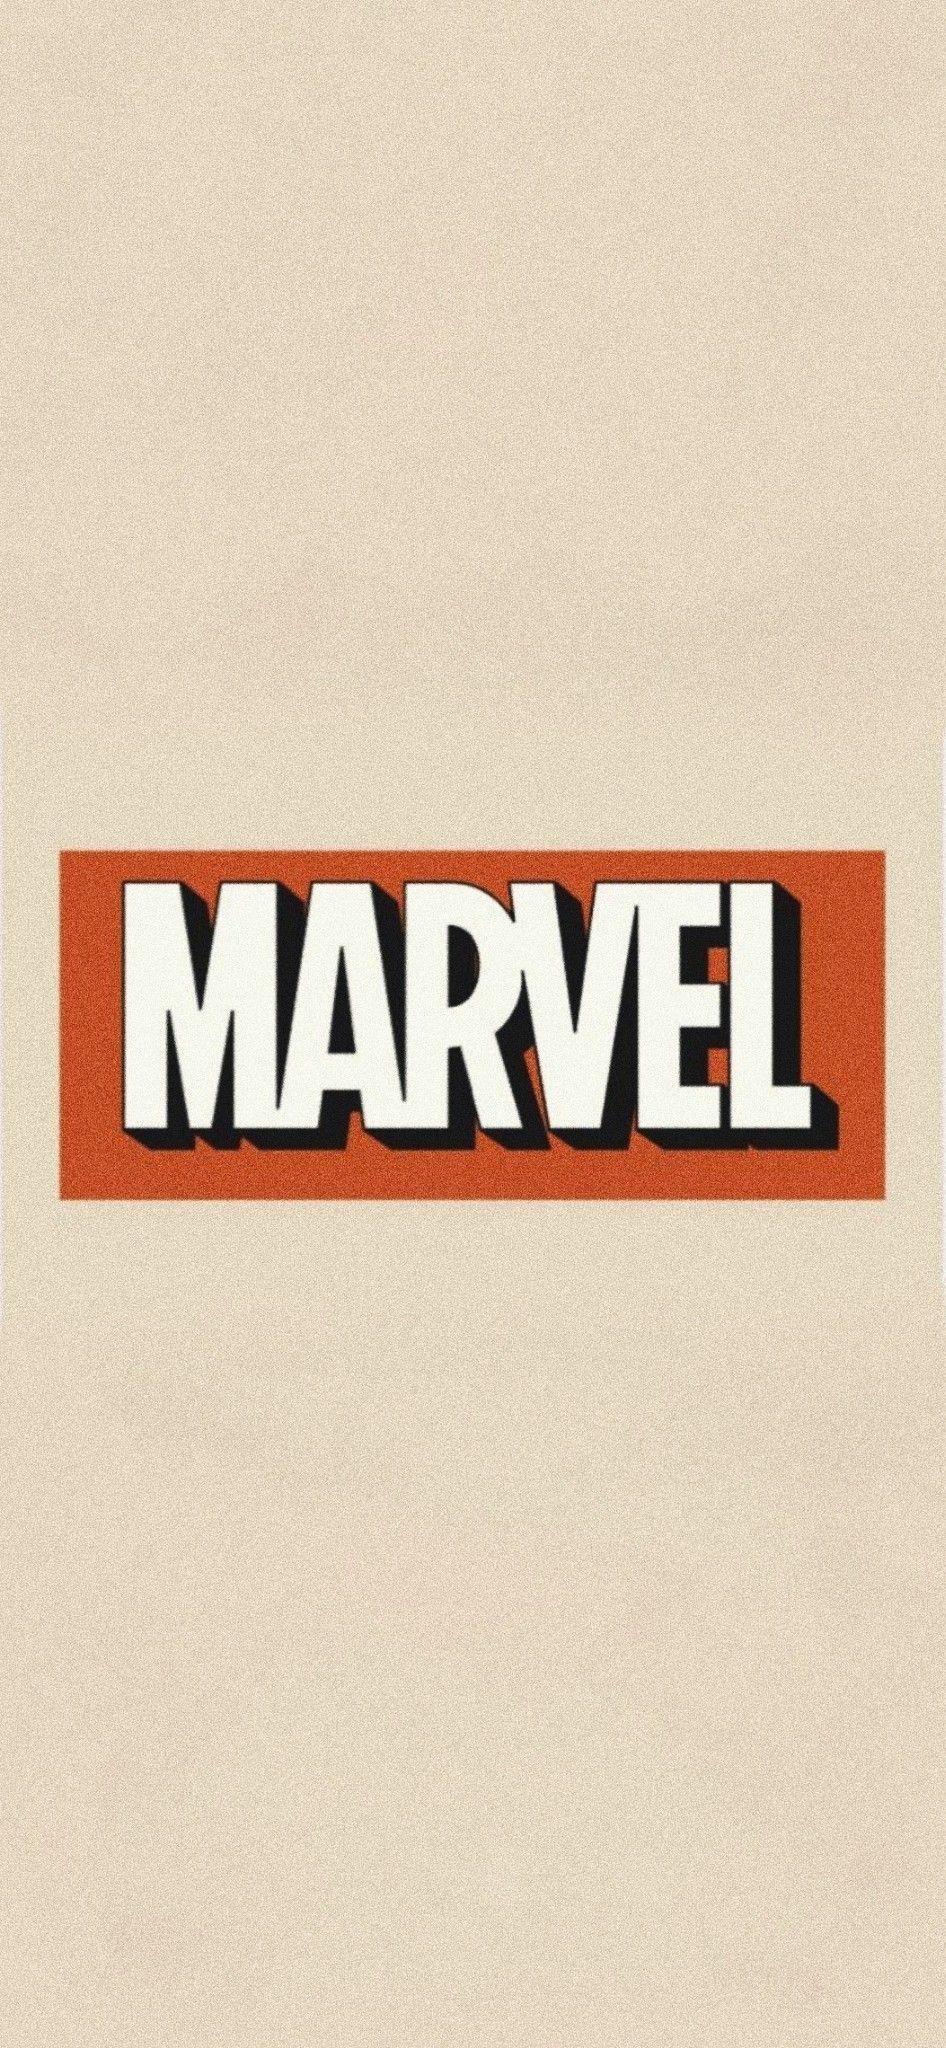 A close up of the word marvel - Marvel, Avengers